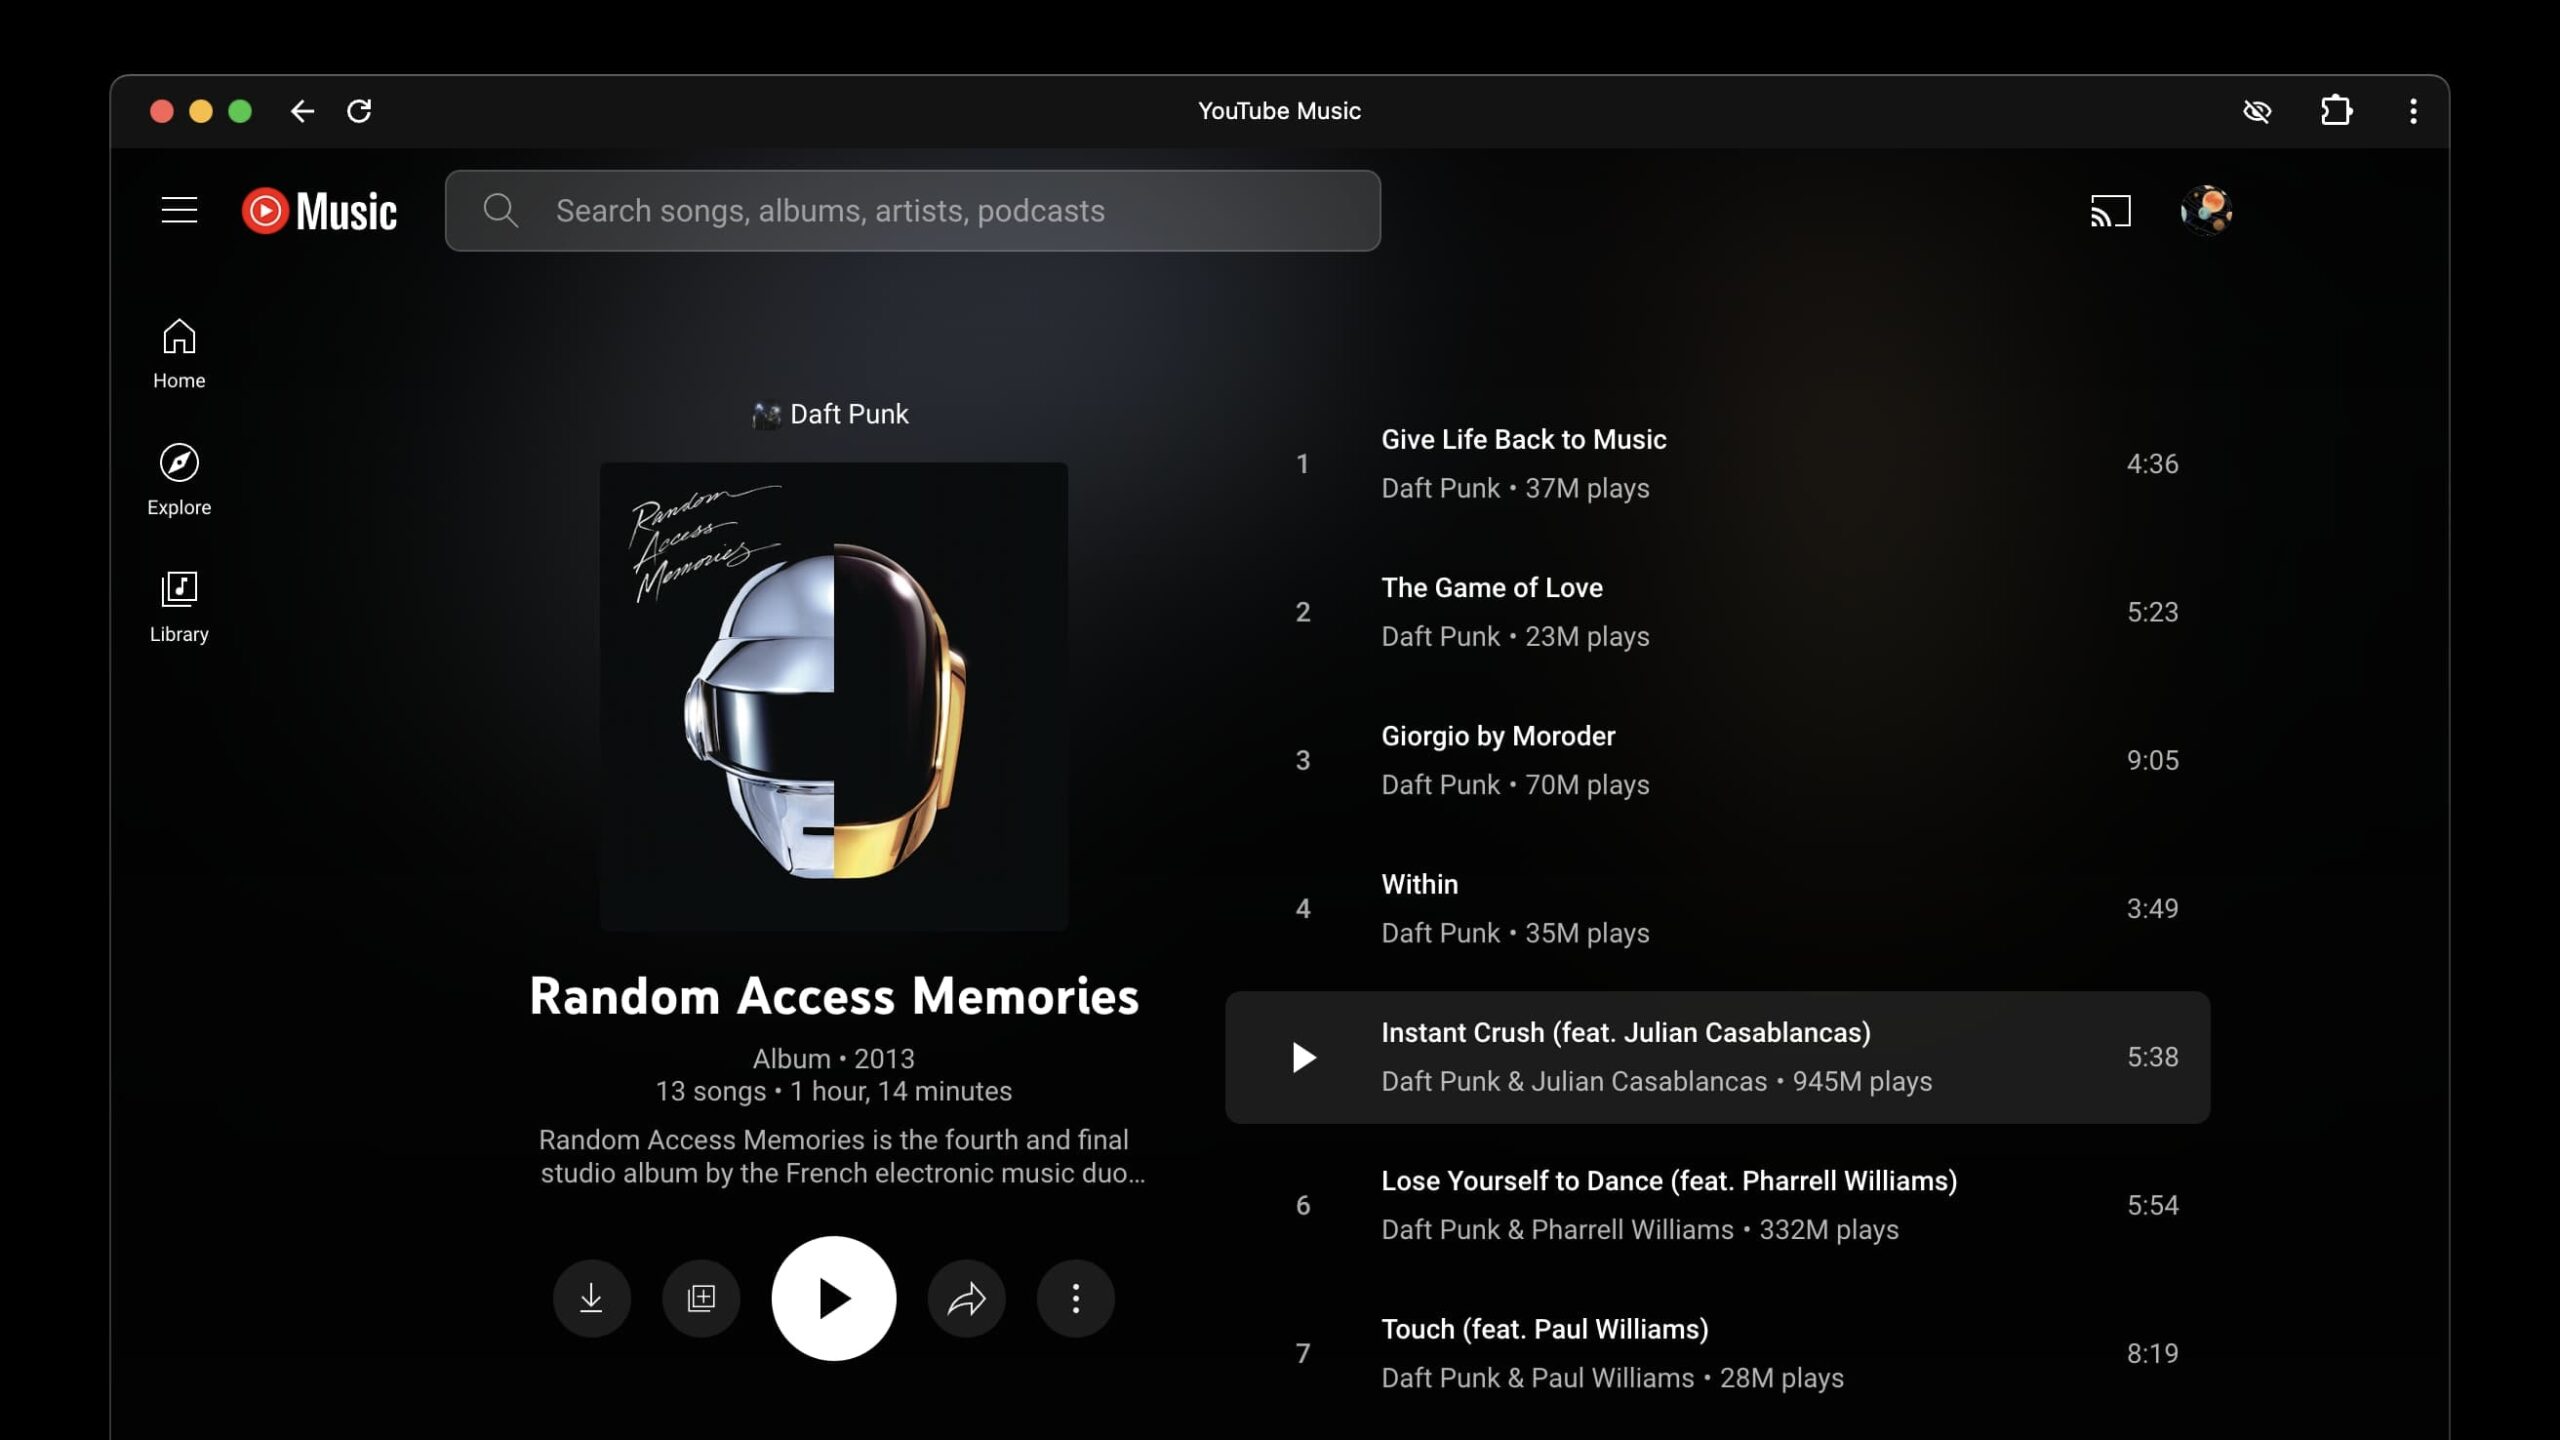 YouTube Music album redesign on the web